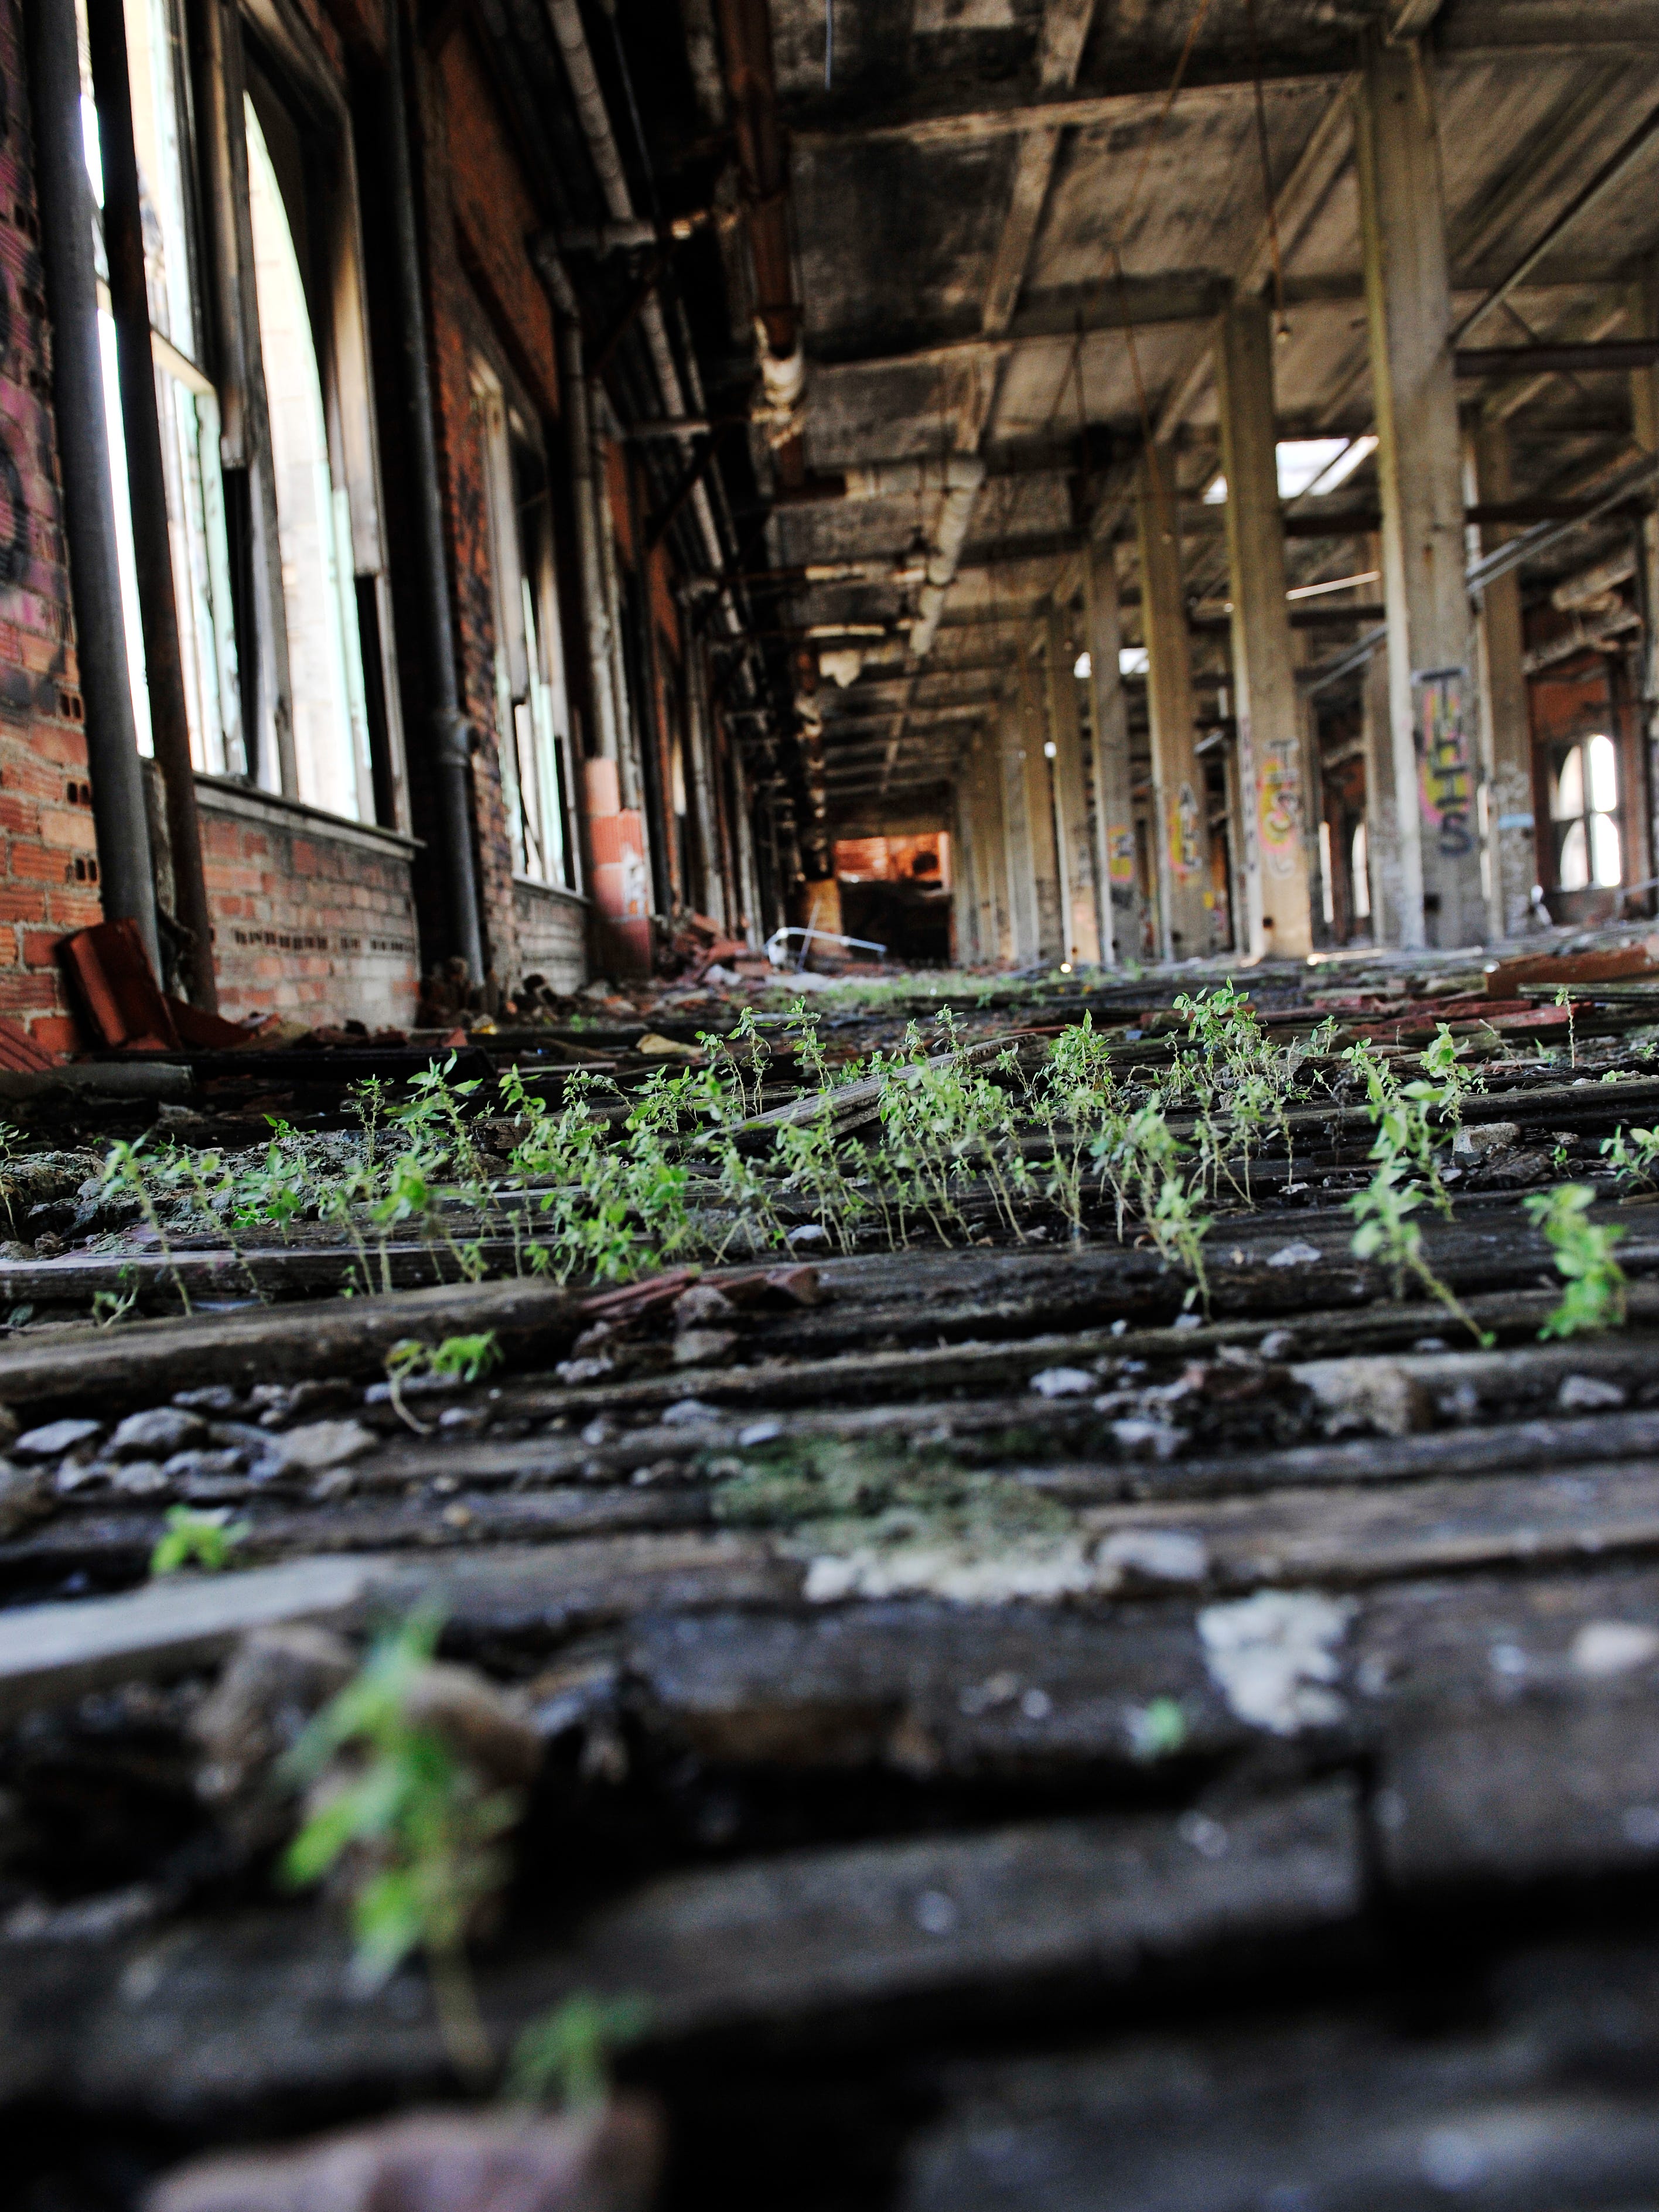 Weeds grow among the debris covering the top floor inside the Michigan Central Depot in 2011. The building's upper floors were never fully occupied.